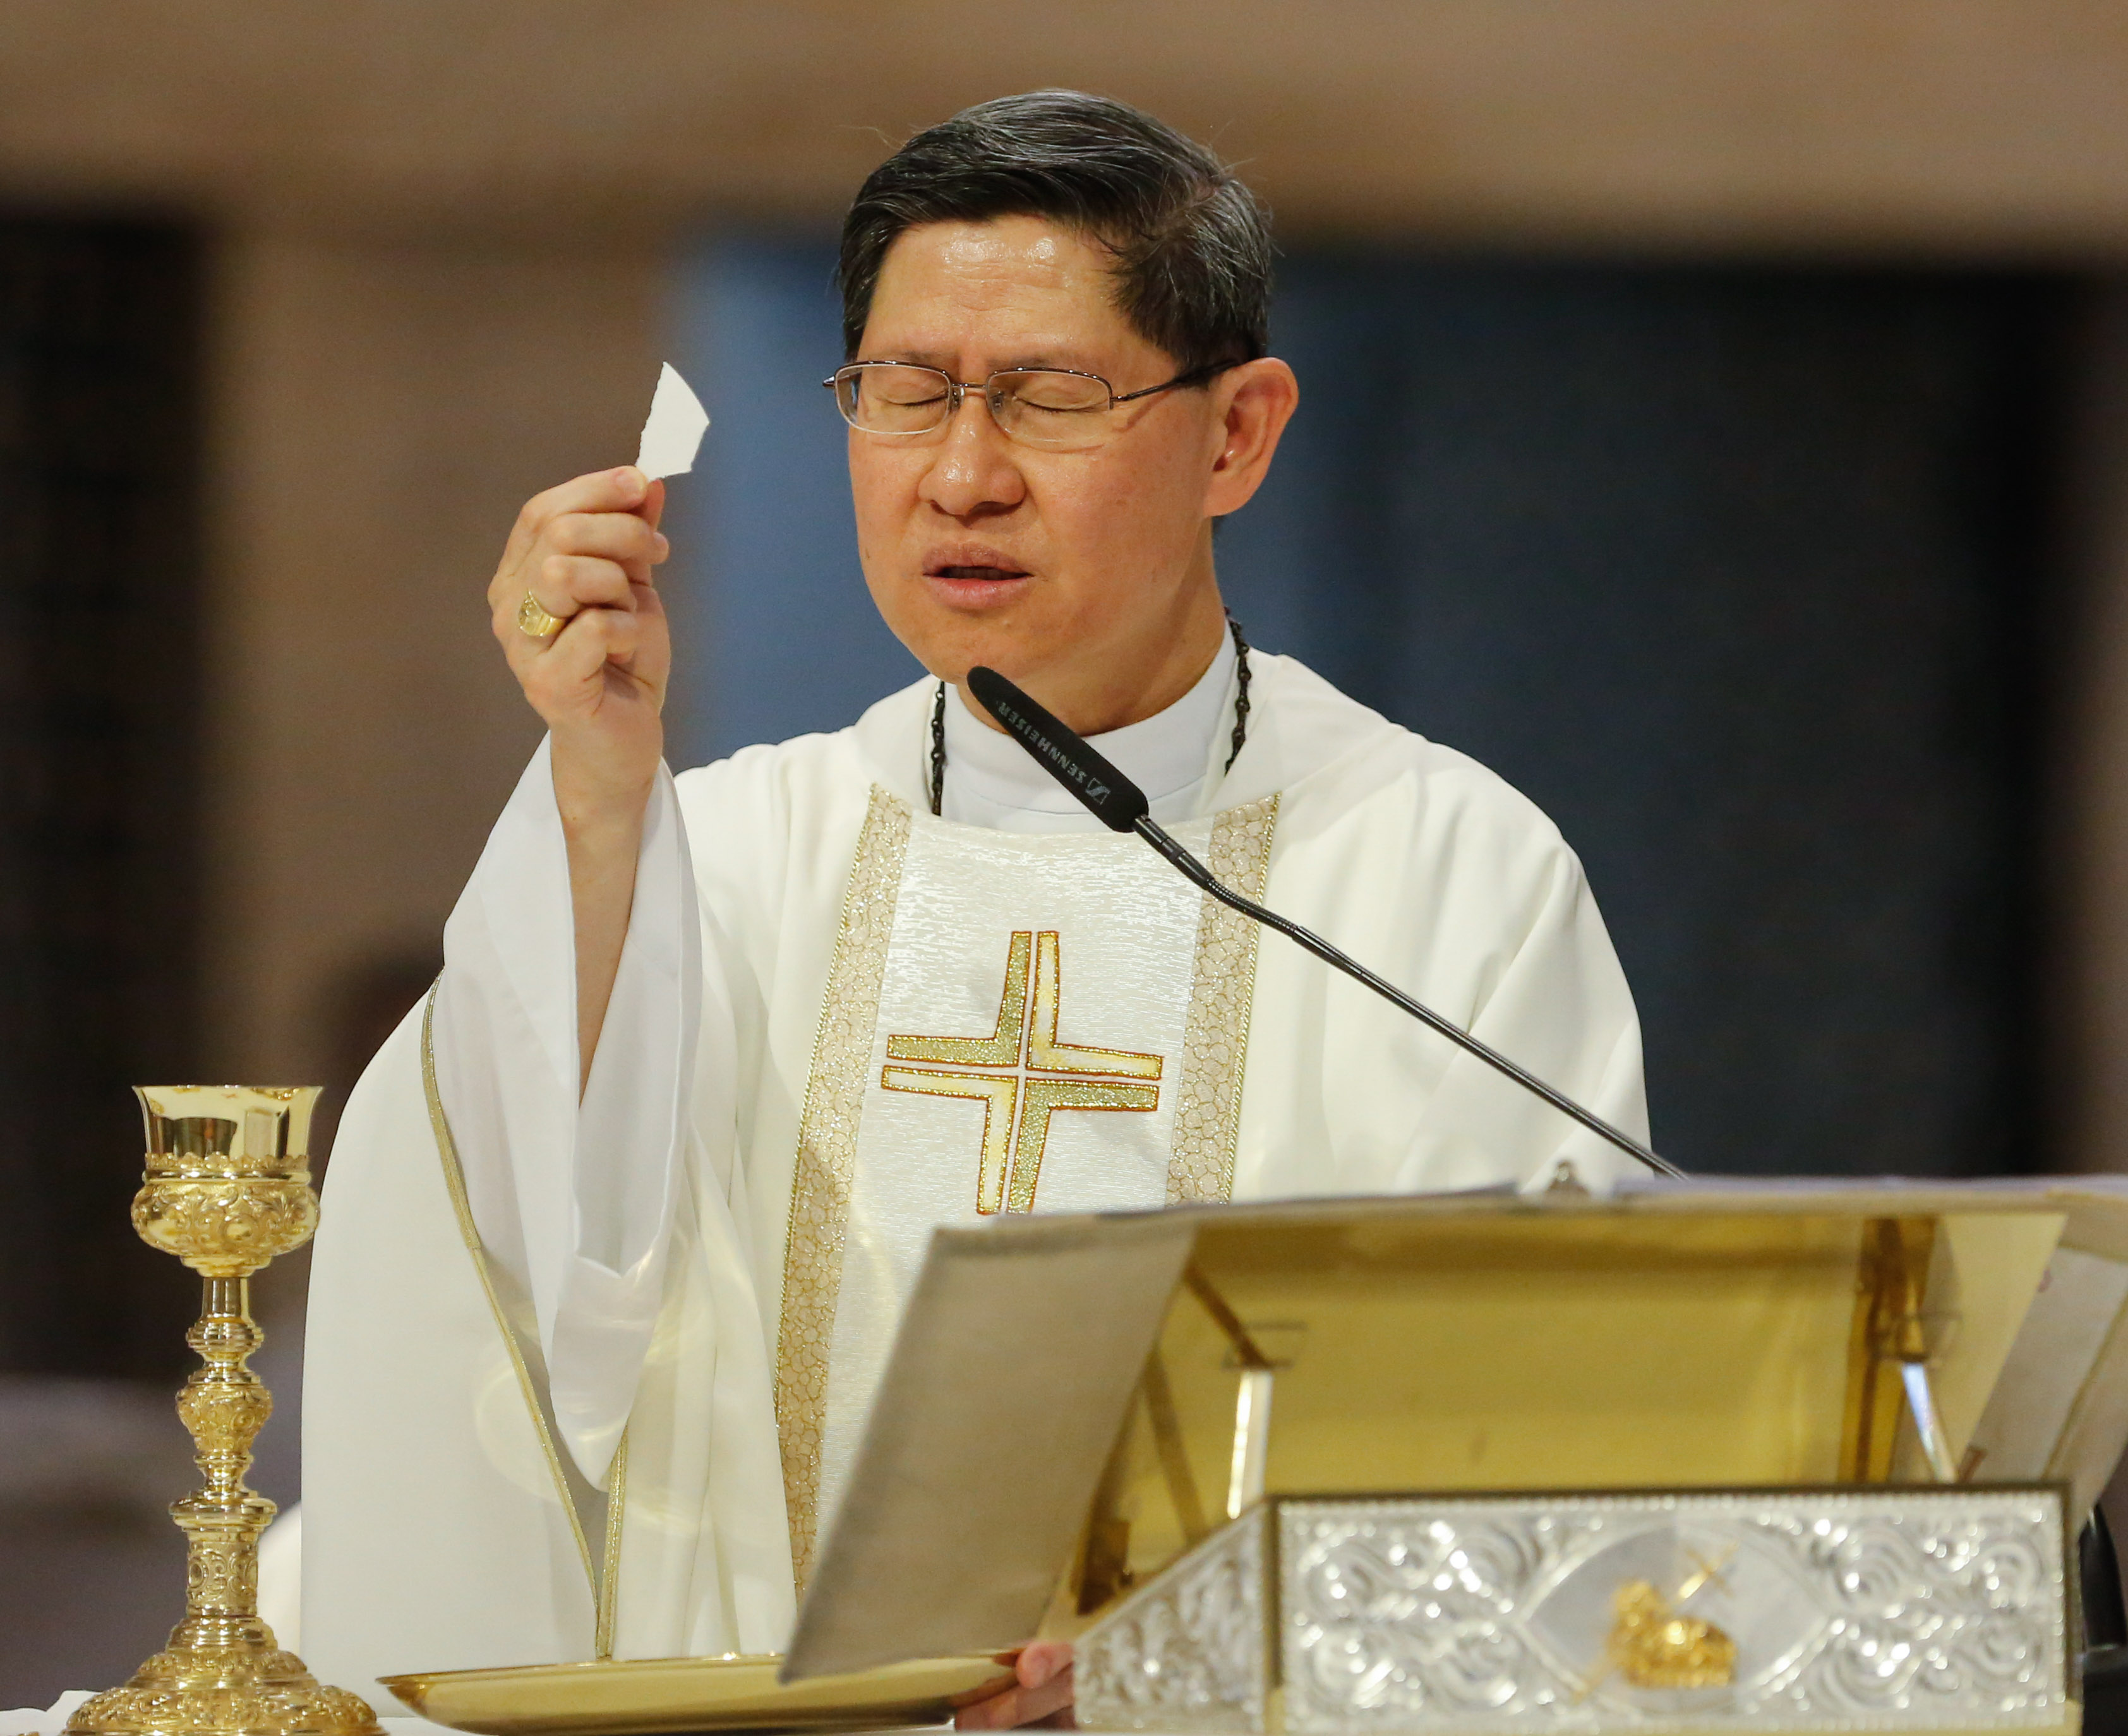 Cardinal Tagle laments deaths of innocent people in Philippines